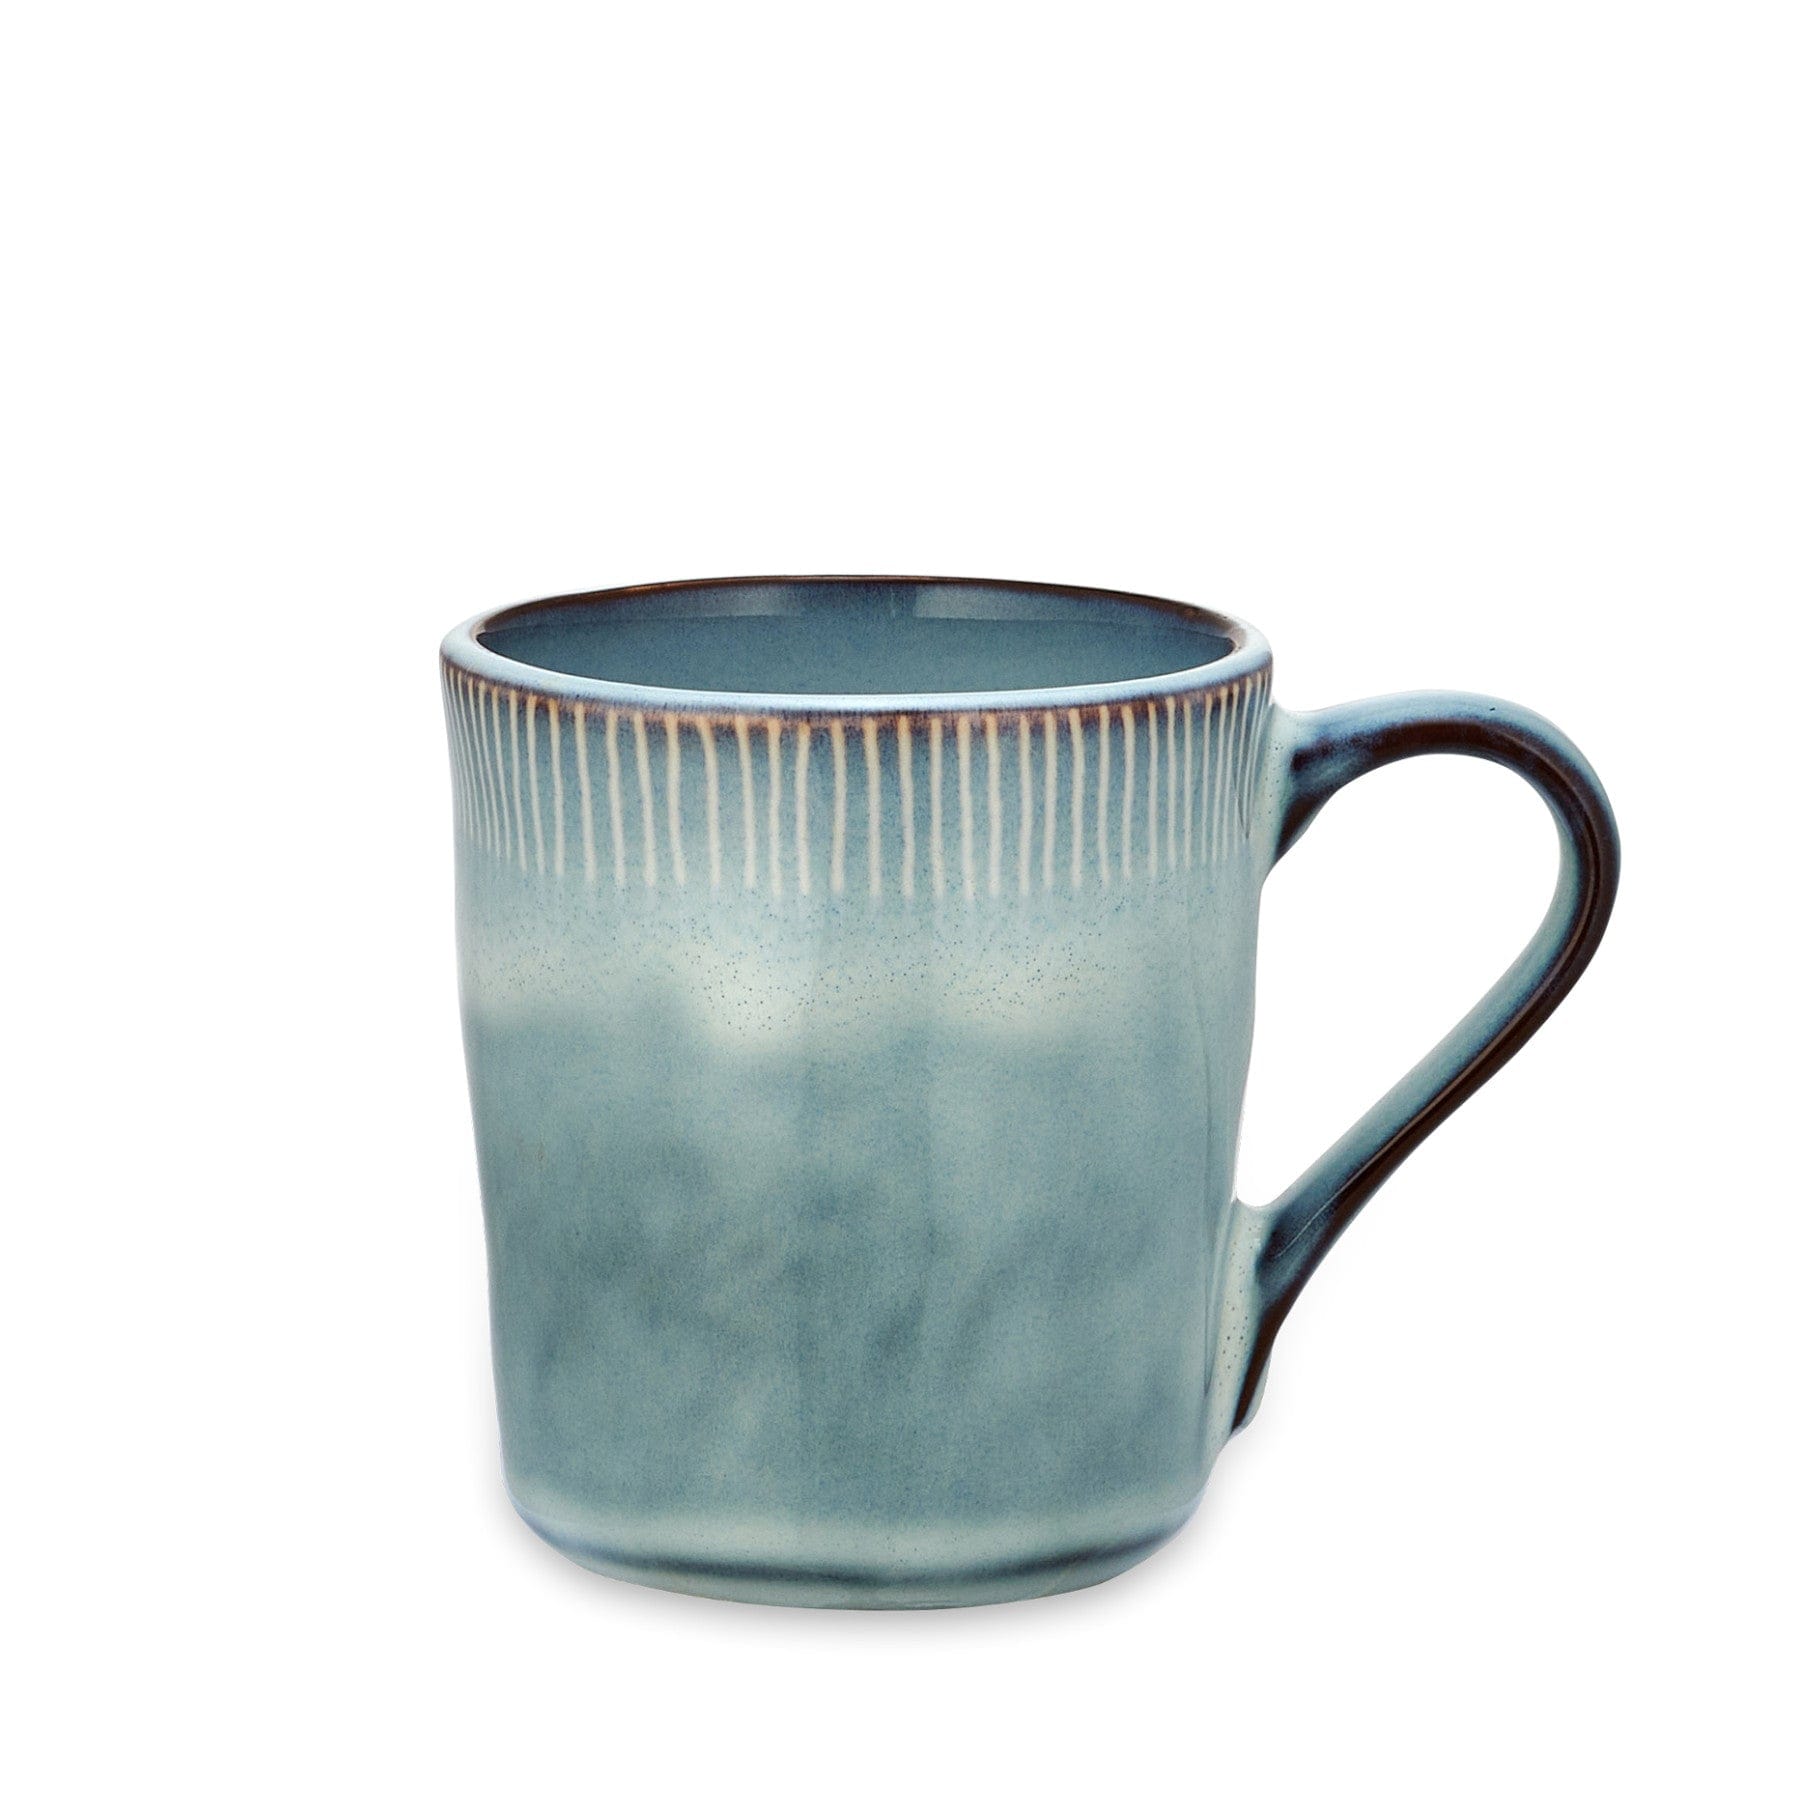 Ceramic blue mug with handle on white background, glazed stoneware coffee cup with vertical ridges design.